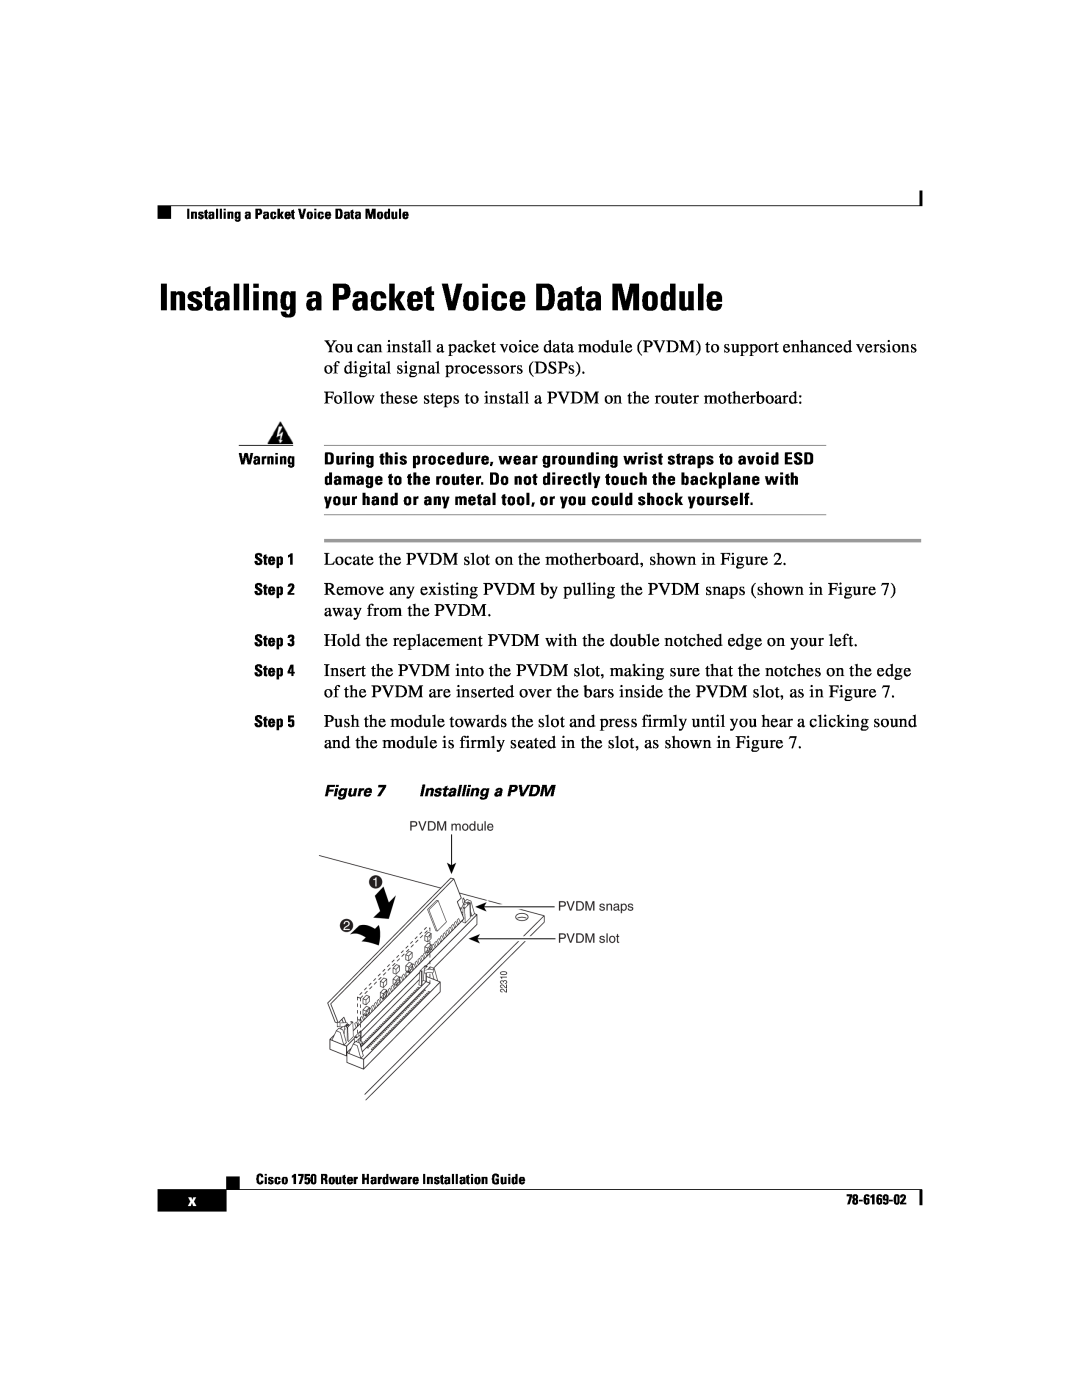 Cisco Systems CISCO1750 manual Installing a Packet Voice Data Module 